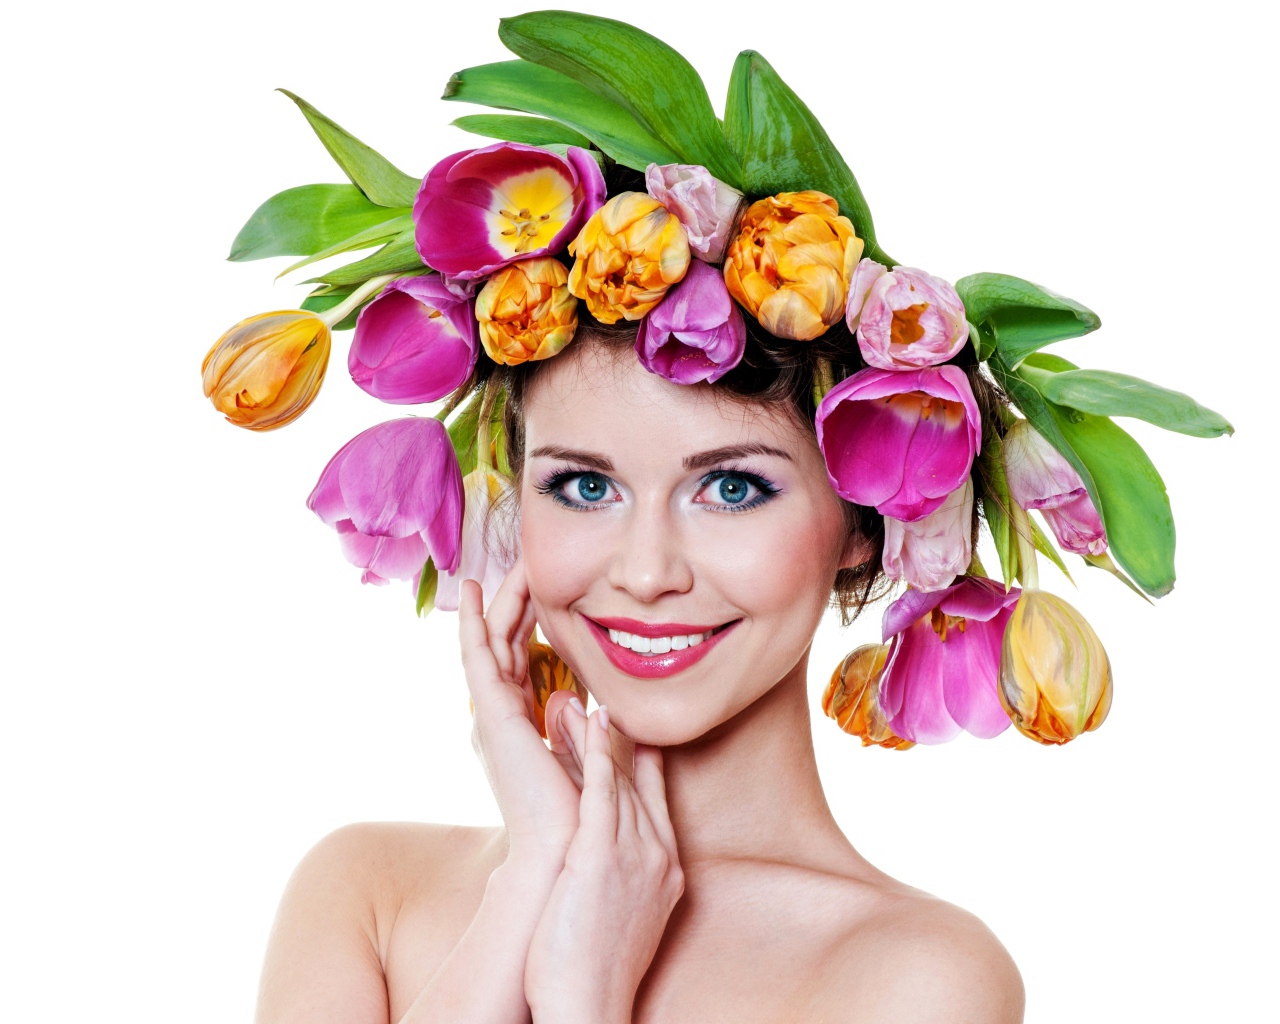 Blue-eyed smiling girl with a wreath of tulips on her head